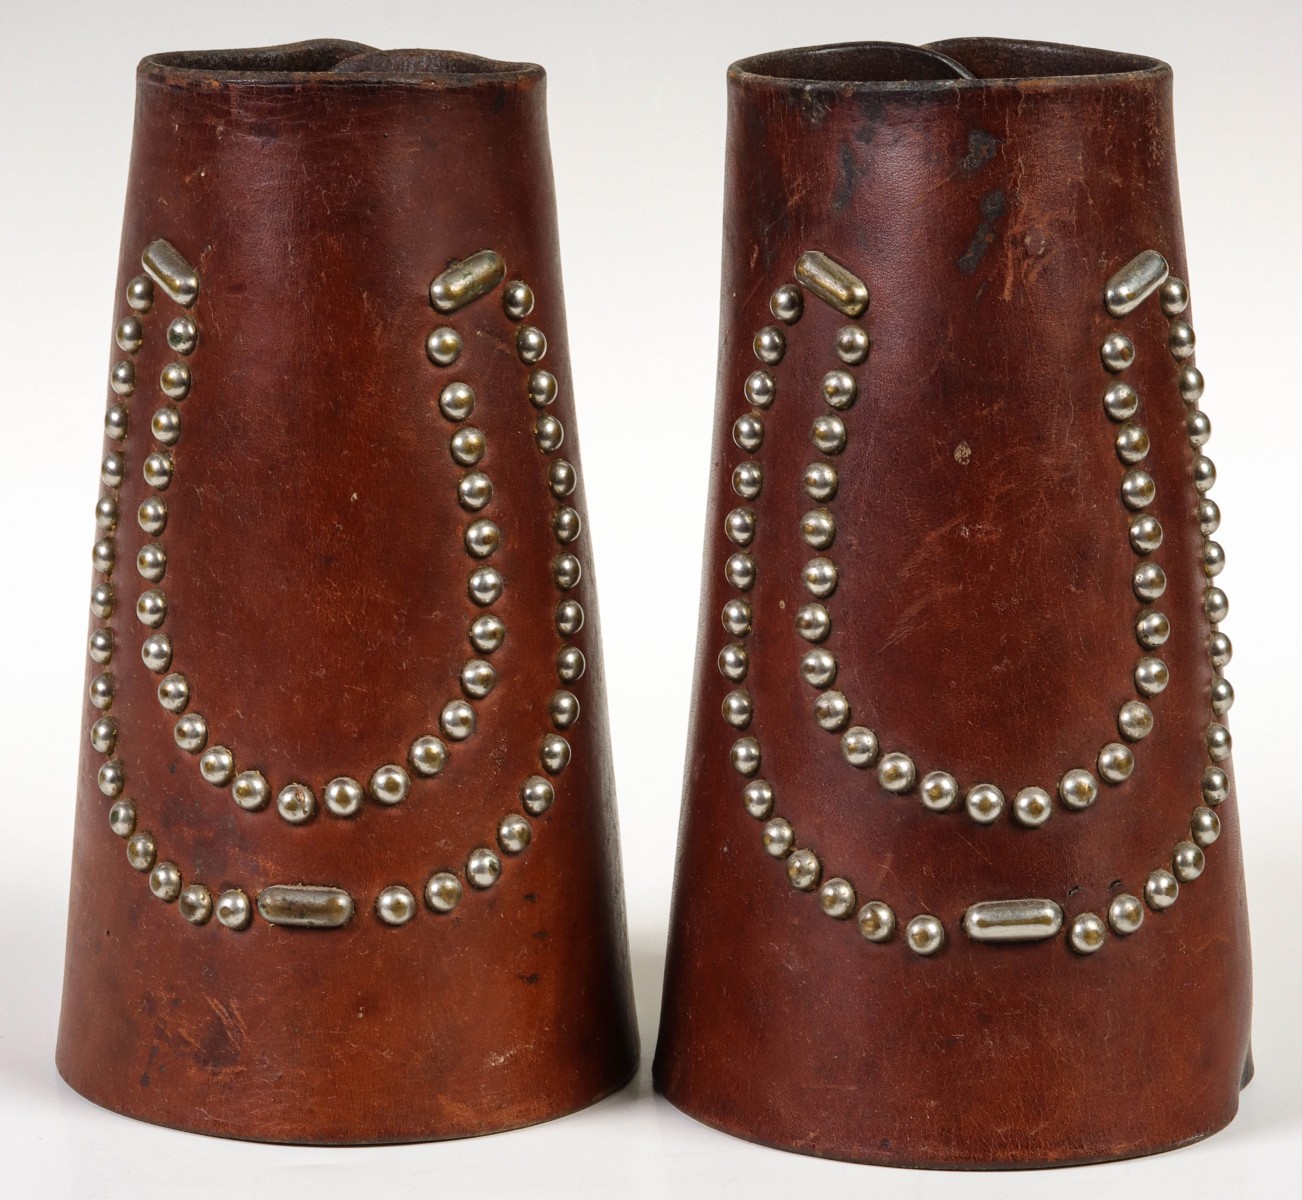 A PAIR OF ASKEW LEATHER CUFFS WITH HORSESHOE MOTIF